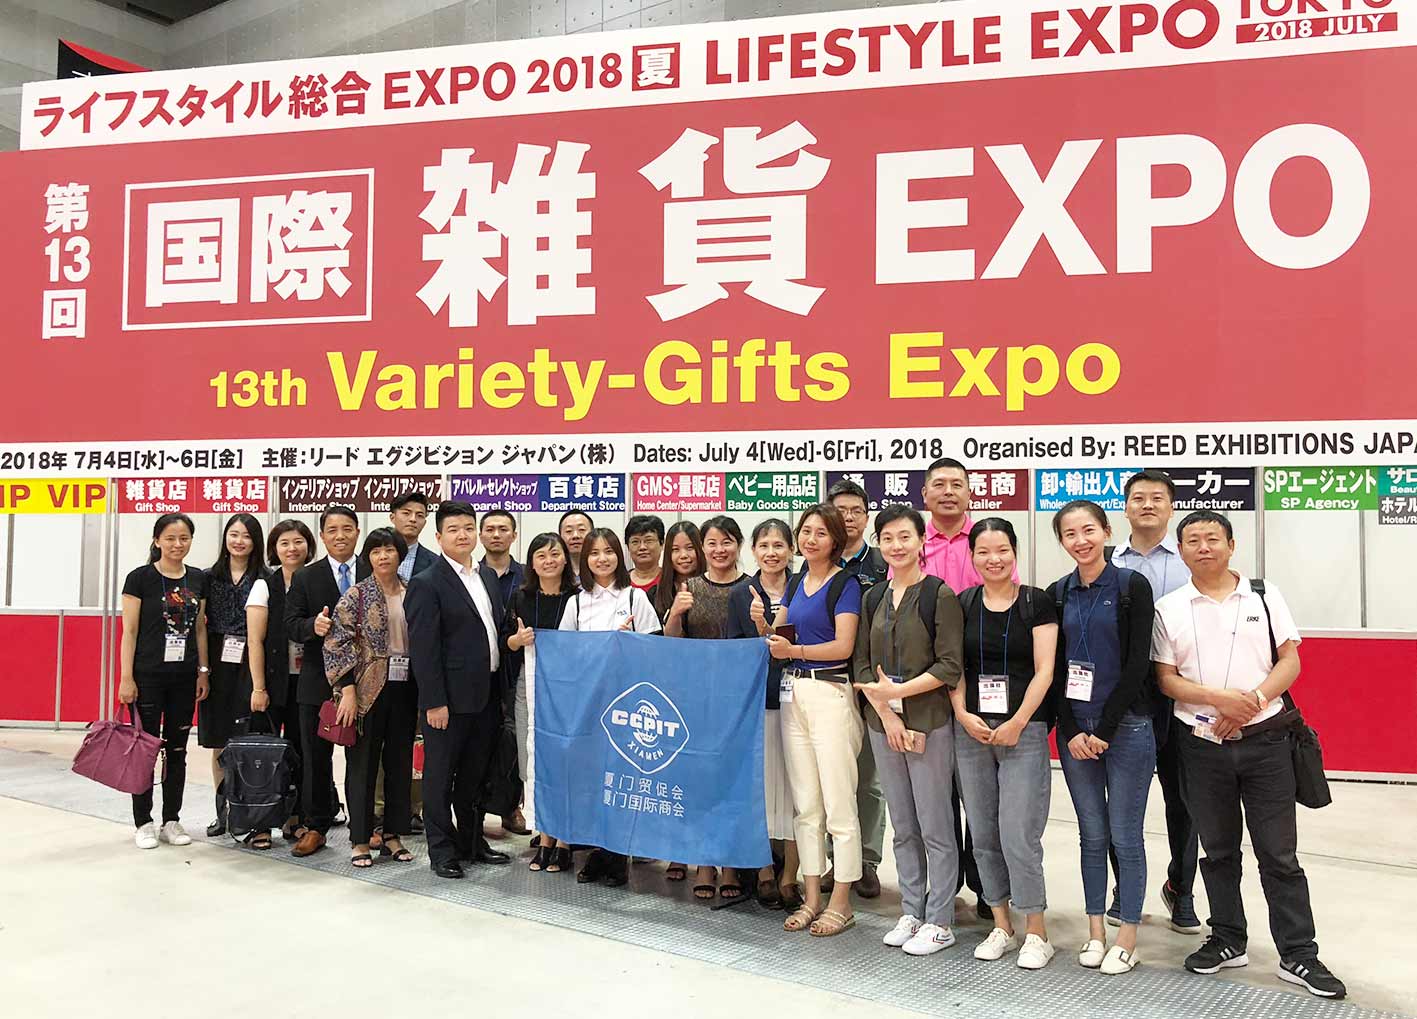 Japanese 13th Variety-Gifts Expo held in Tokyo